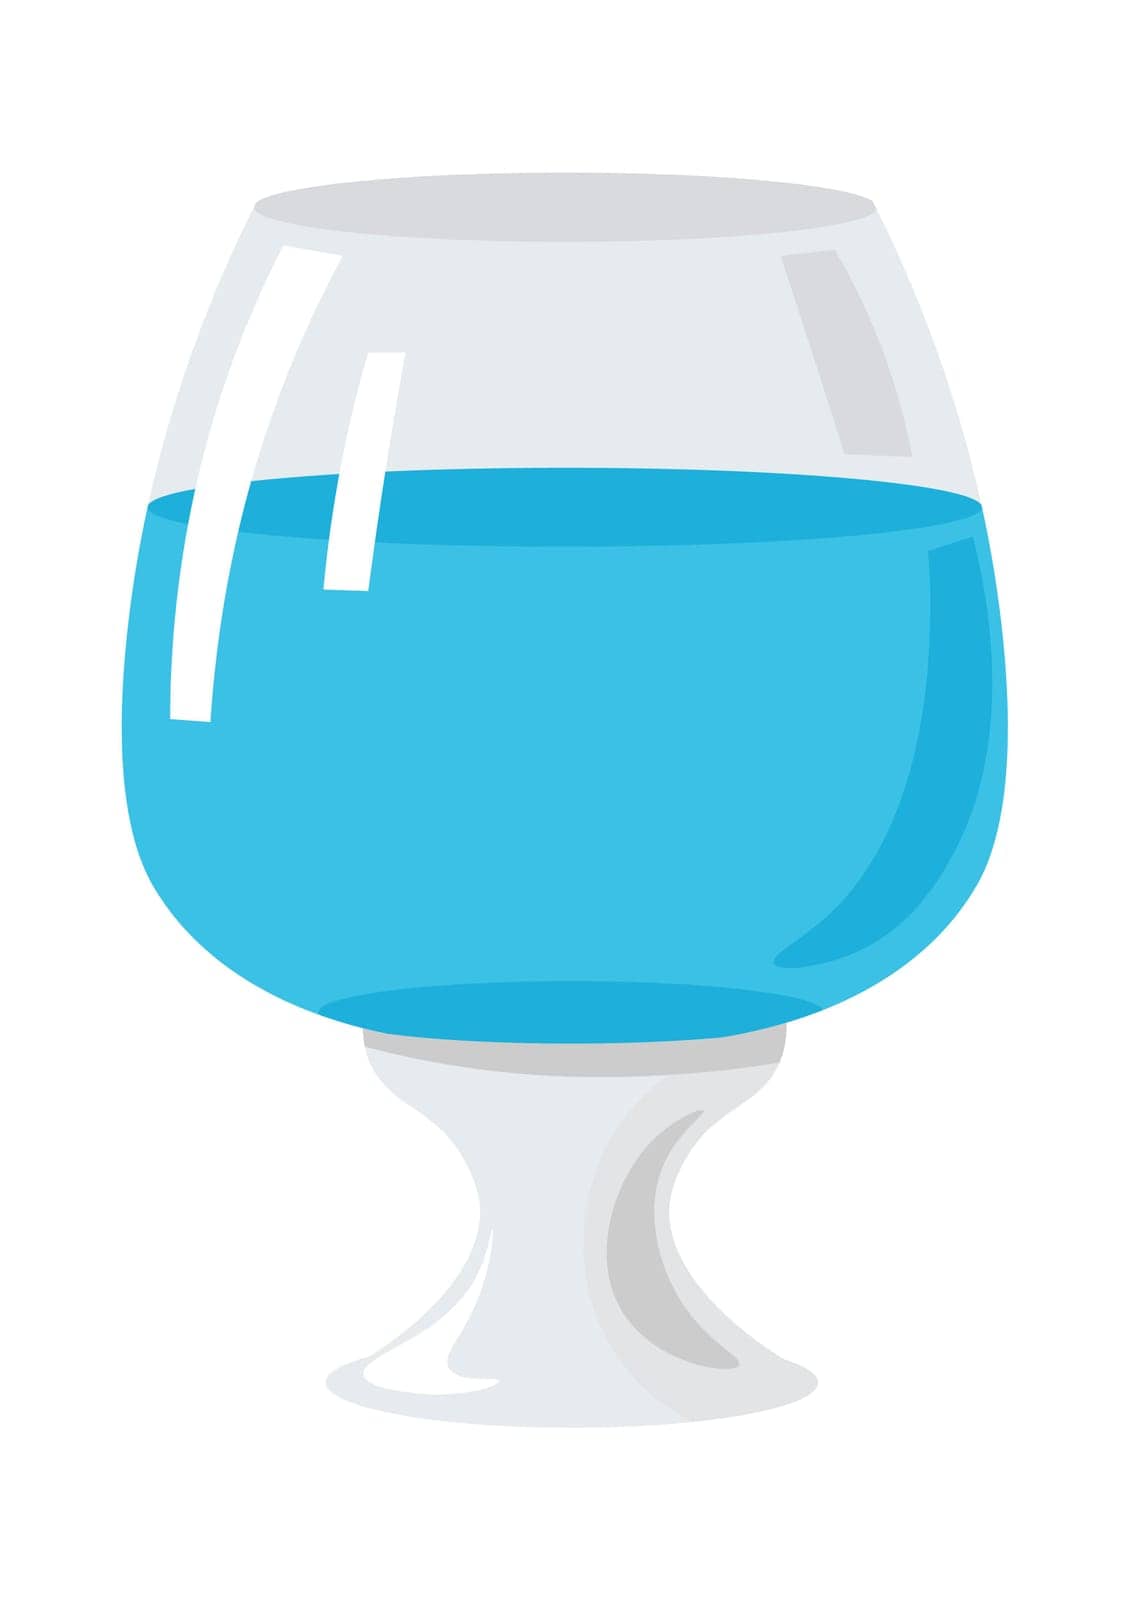 Dishware and glassware for serving drinks and beverages, strong alcohol. Glass for cognac or bourbon, brandy or whiskey, water or liquor in container. Utensil and dishes. Vector in flat style